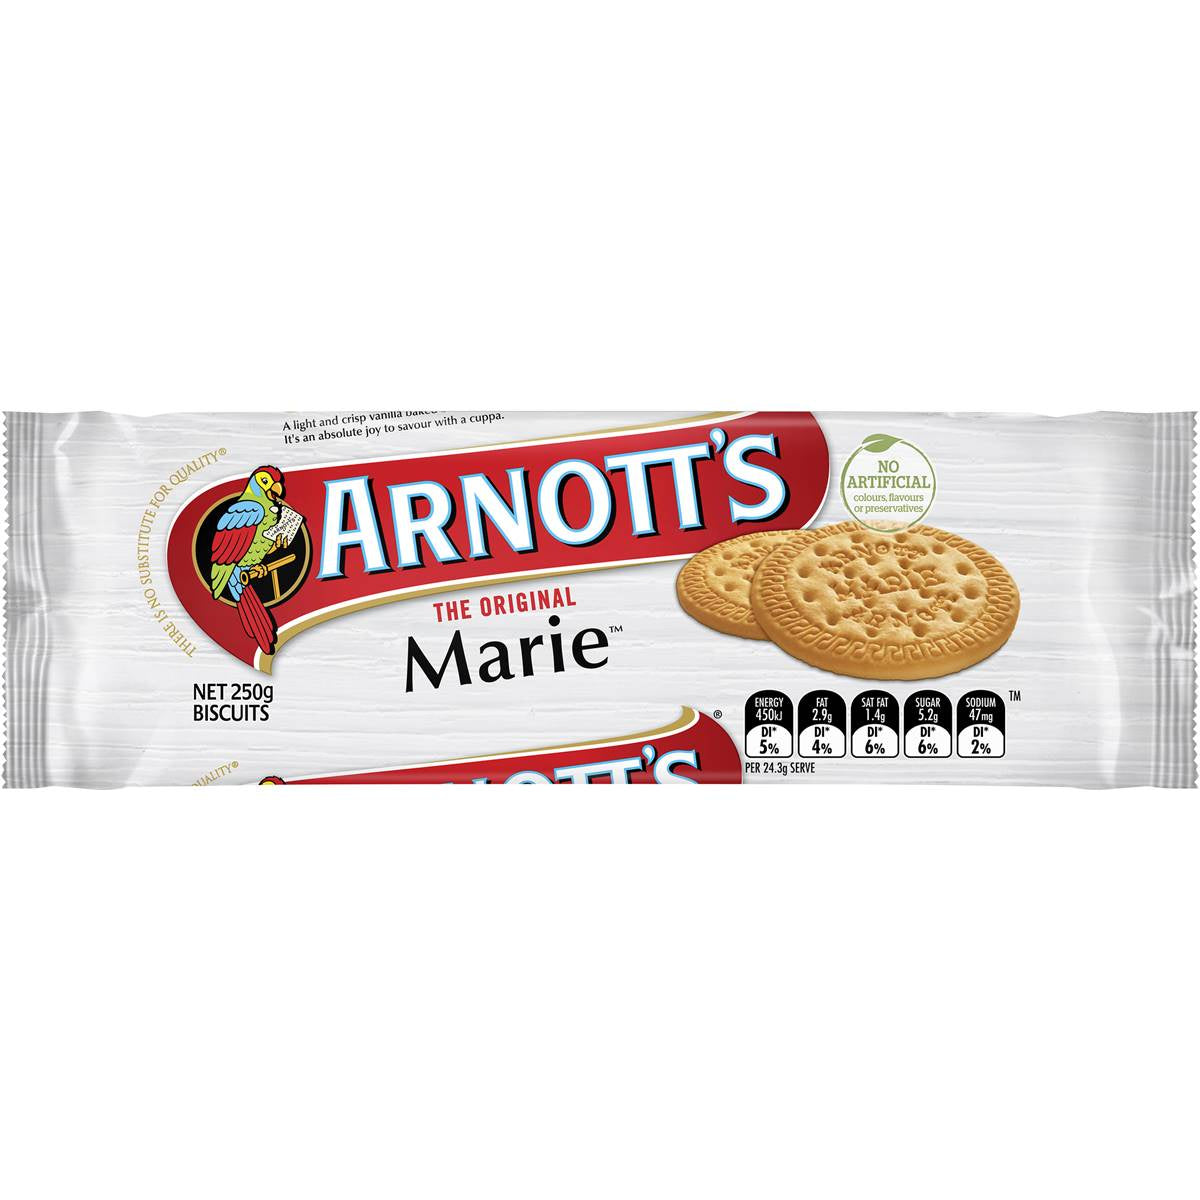 Arnotts Marie Biscuits 250g *